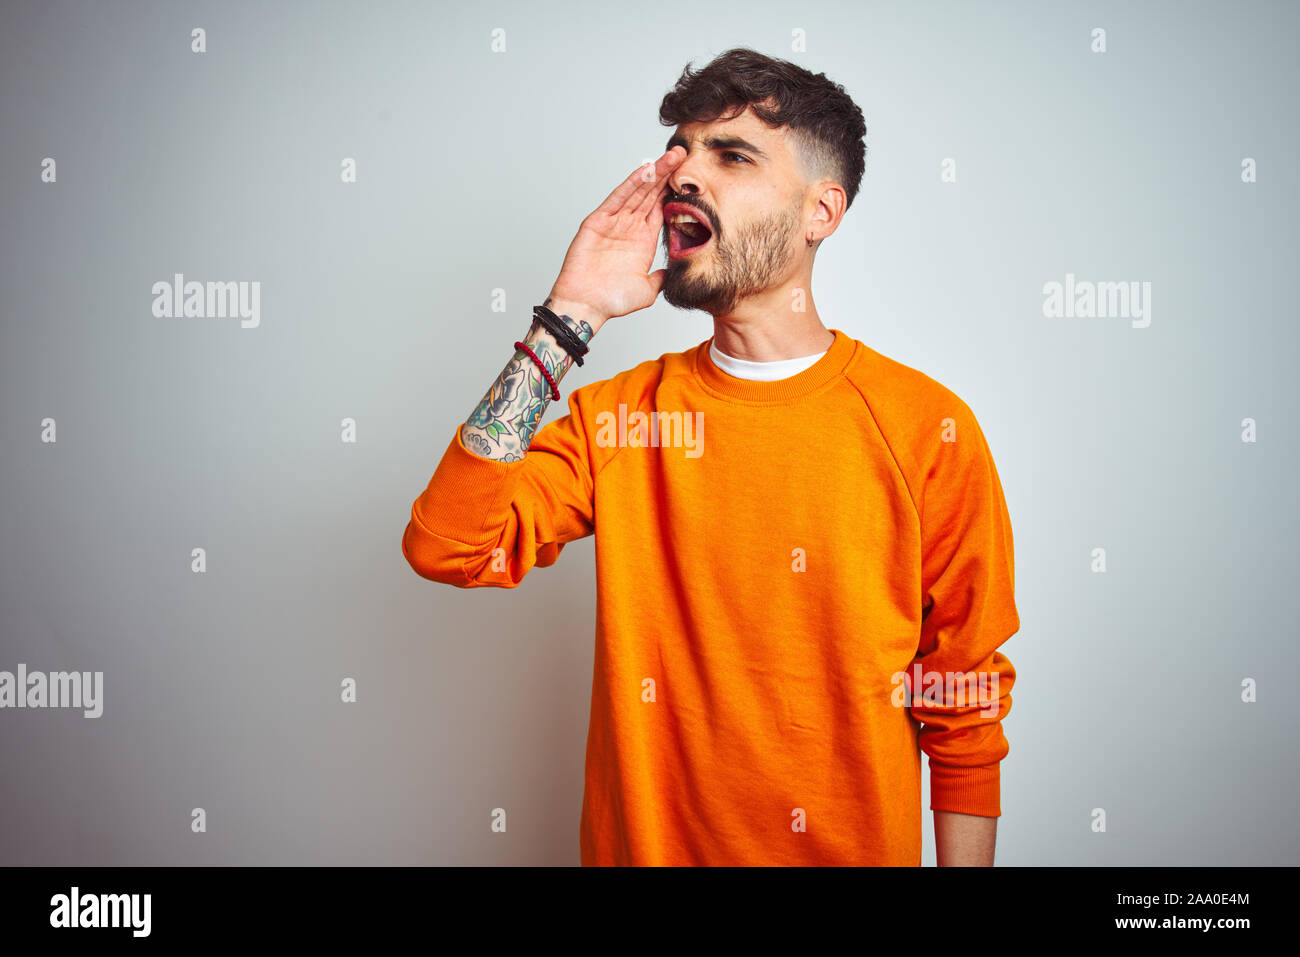 Young man with tattoo wearing orange sweater standing over isolated white background shouting and screaming loud to side with hand on mouth. Communica Stock Photo